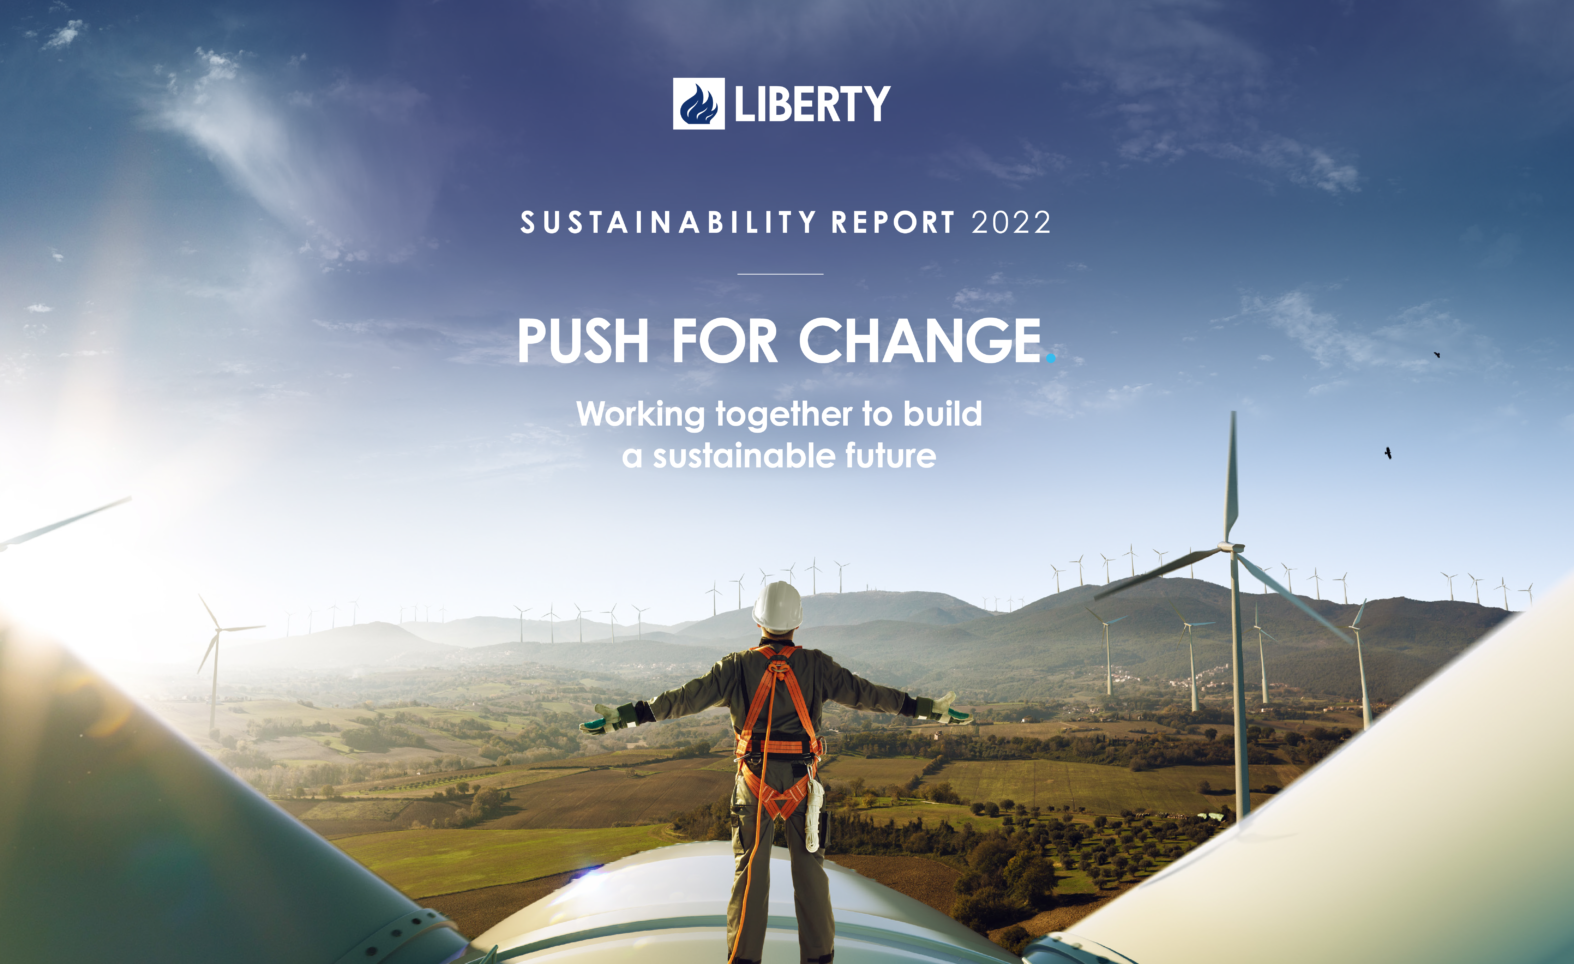 LIBERTY Steel Group’s 1st Sustainability Report